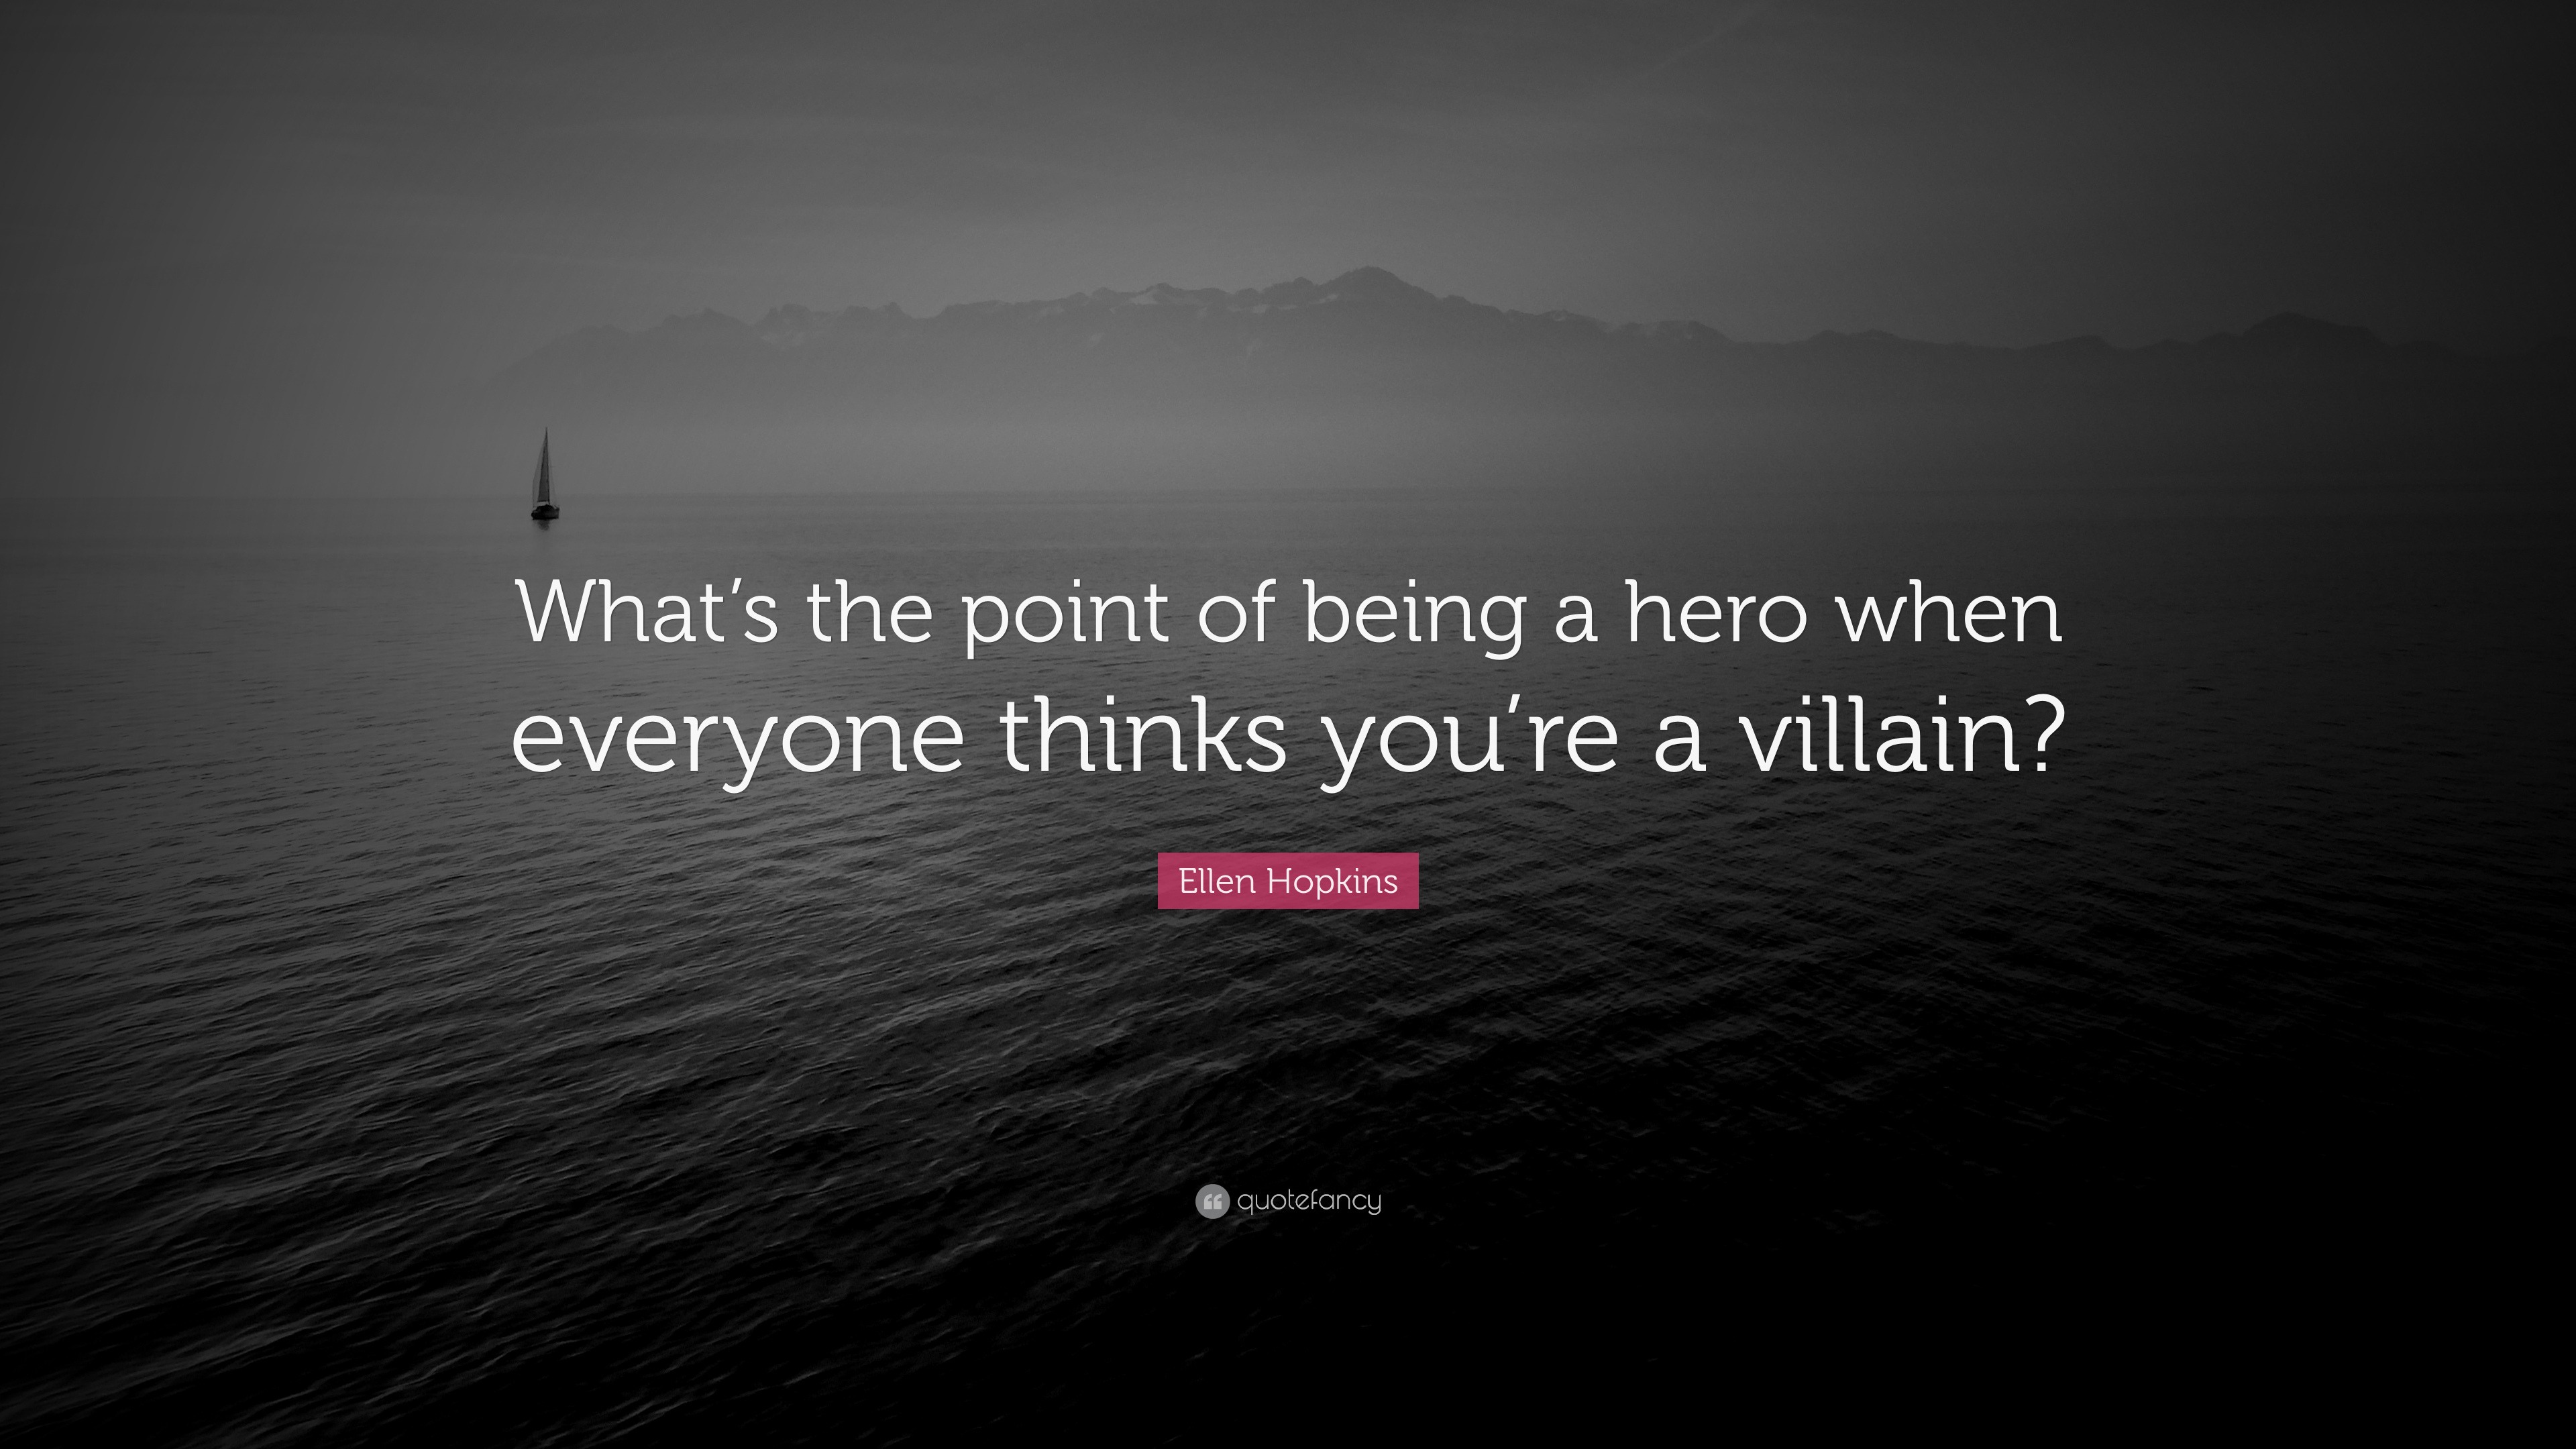 Ellen Hopkins Quote: “What’s the point of being a hero when everyone ...